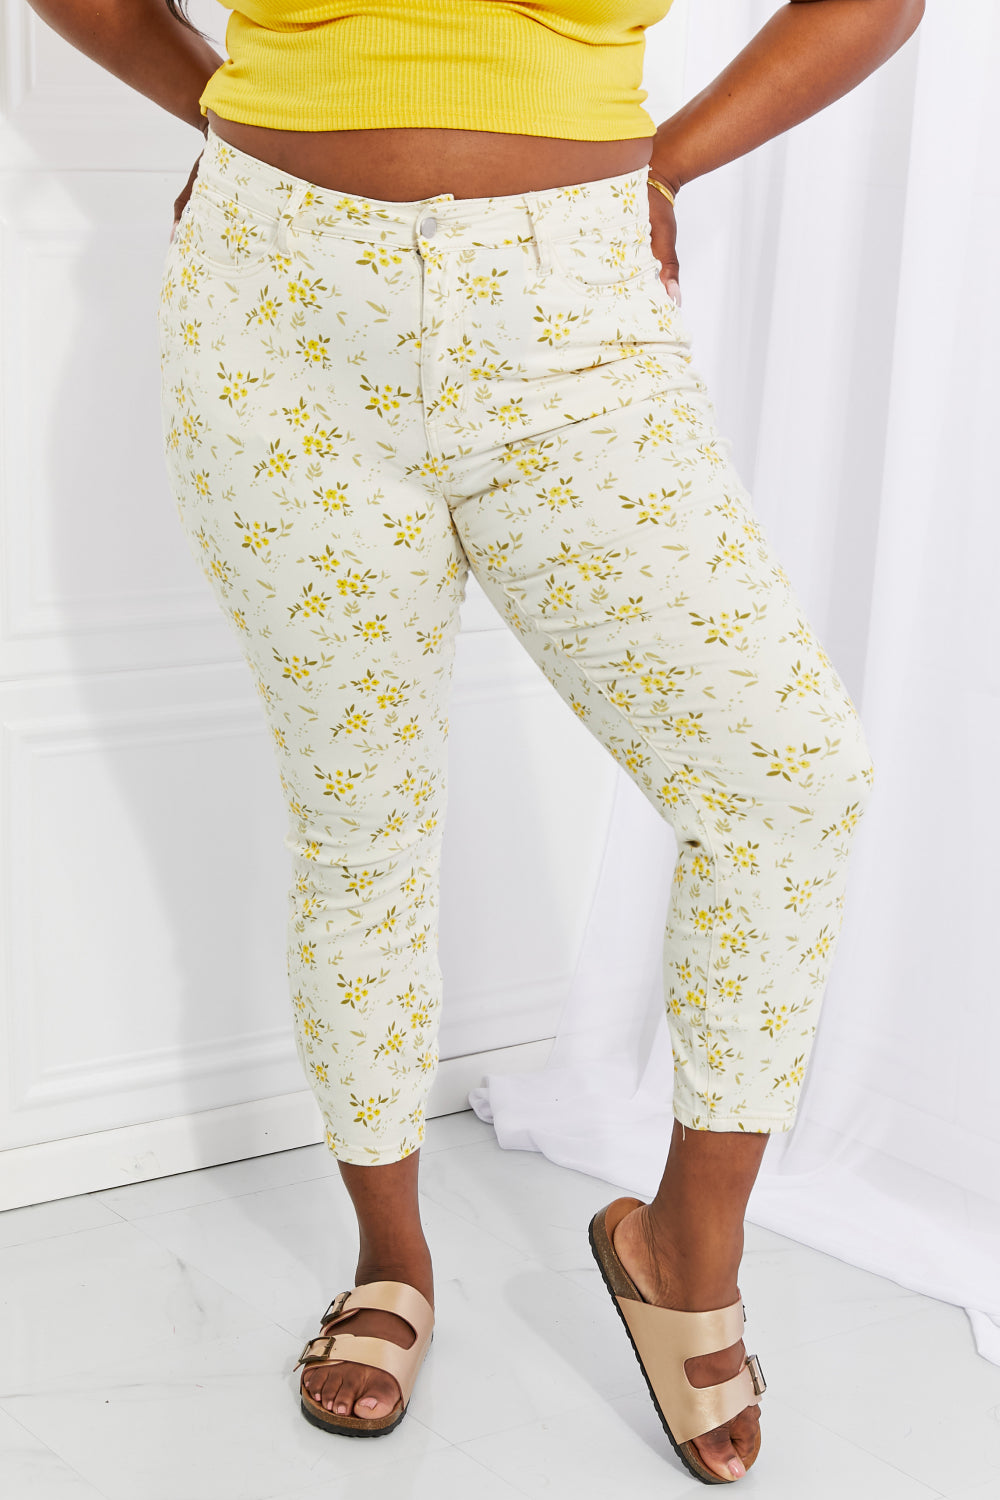 Judy Blue Floral Skinny Jeans - AnnRose Boutique